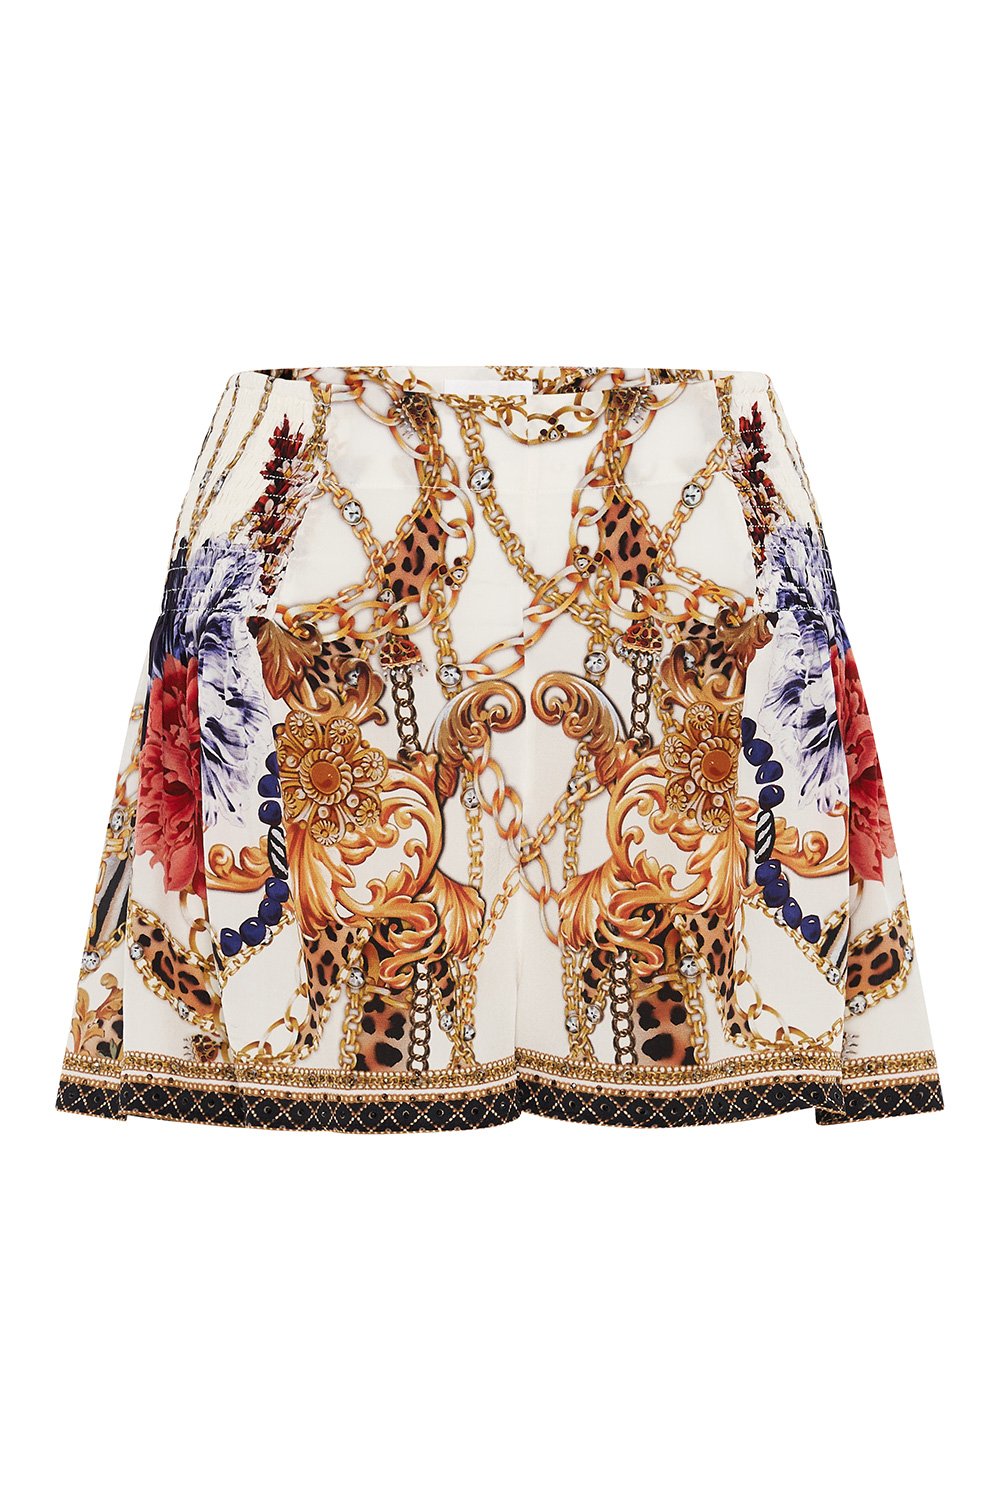 SHORTS WITH SIDE FLOUNCE REIGN SUPREME